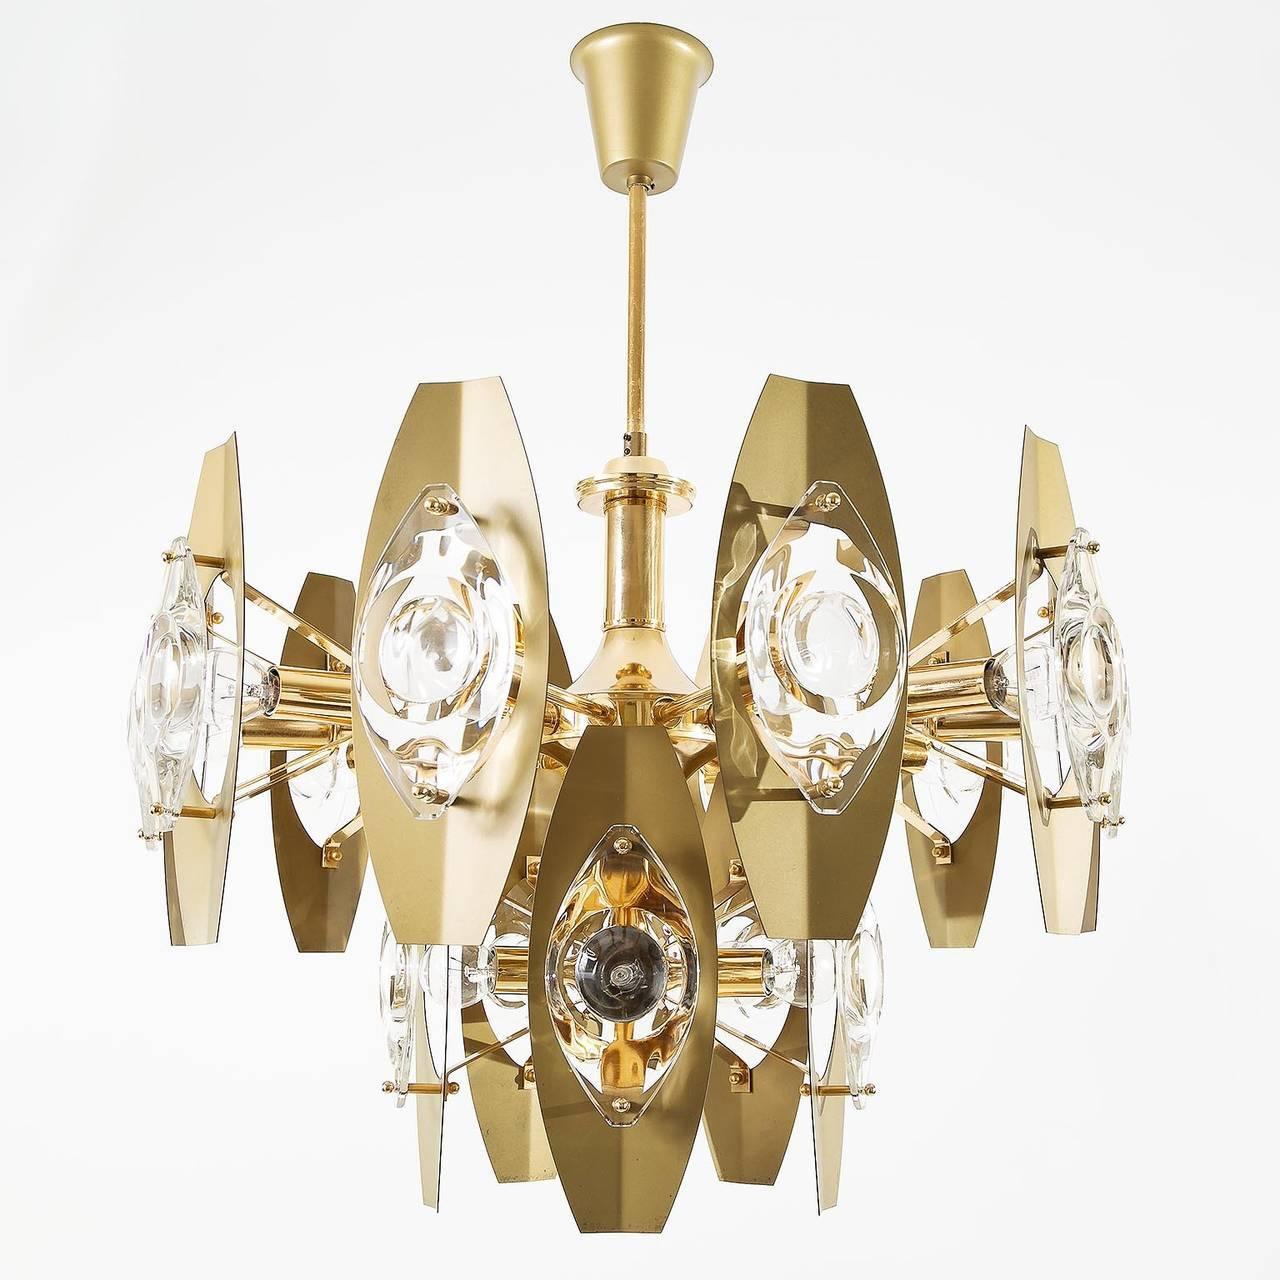 Two large and beautiful Italian hollywood regency light fixtures by Oscar Torlasco, Italy, manufactured in Mid-Century, circa 1970 (late 1960s or early 1970s).
Each chandelier has 15-arms with fittings for E14 candelabra screw base bulbs up to max.